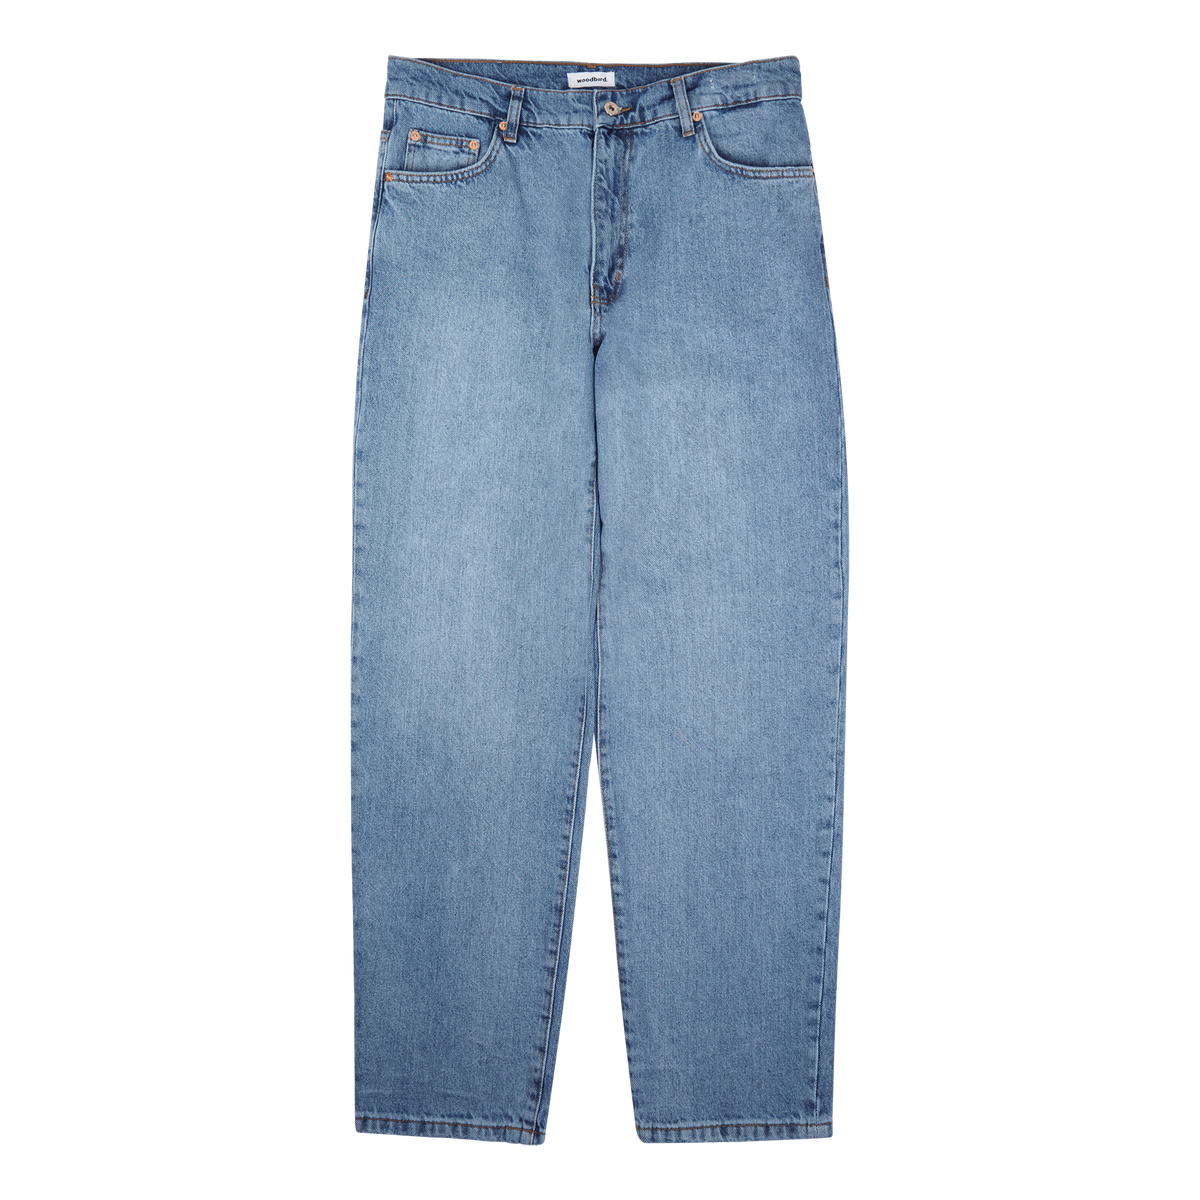 Leroy Doone Jeans Washed